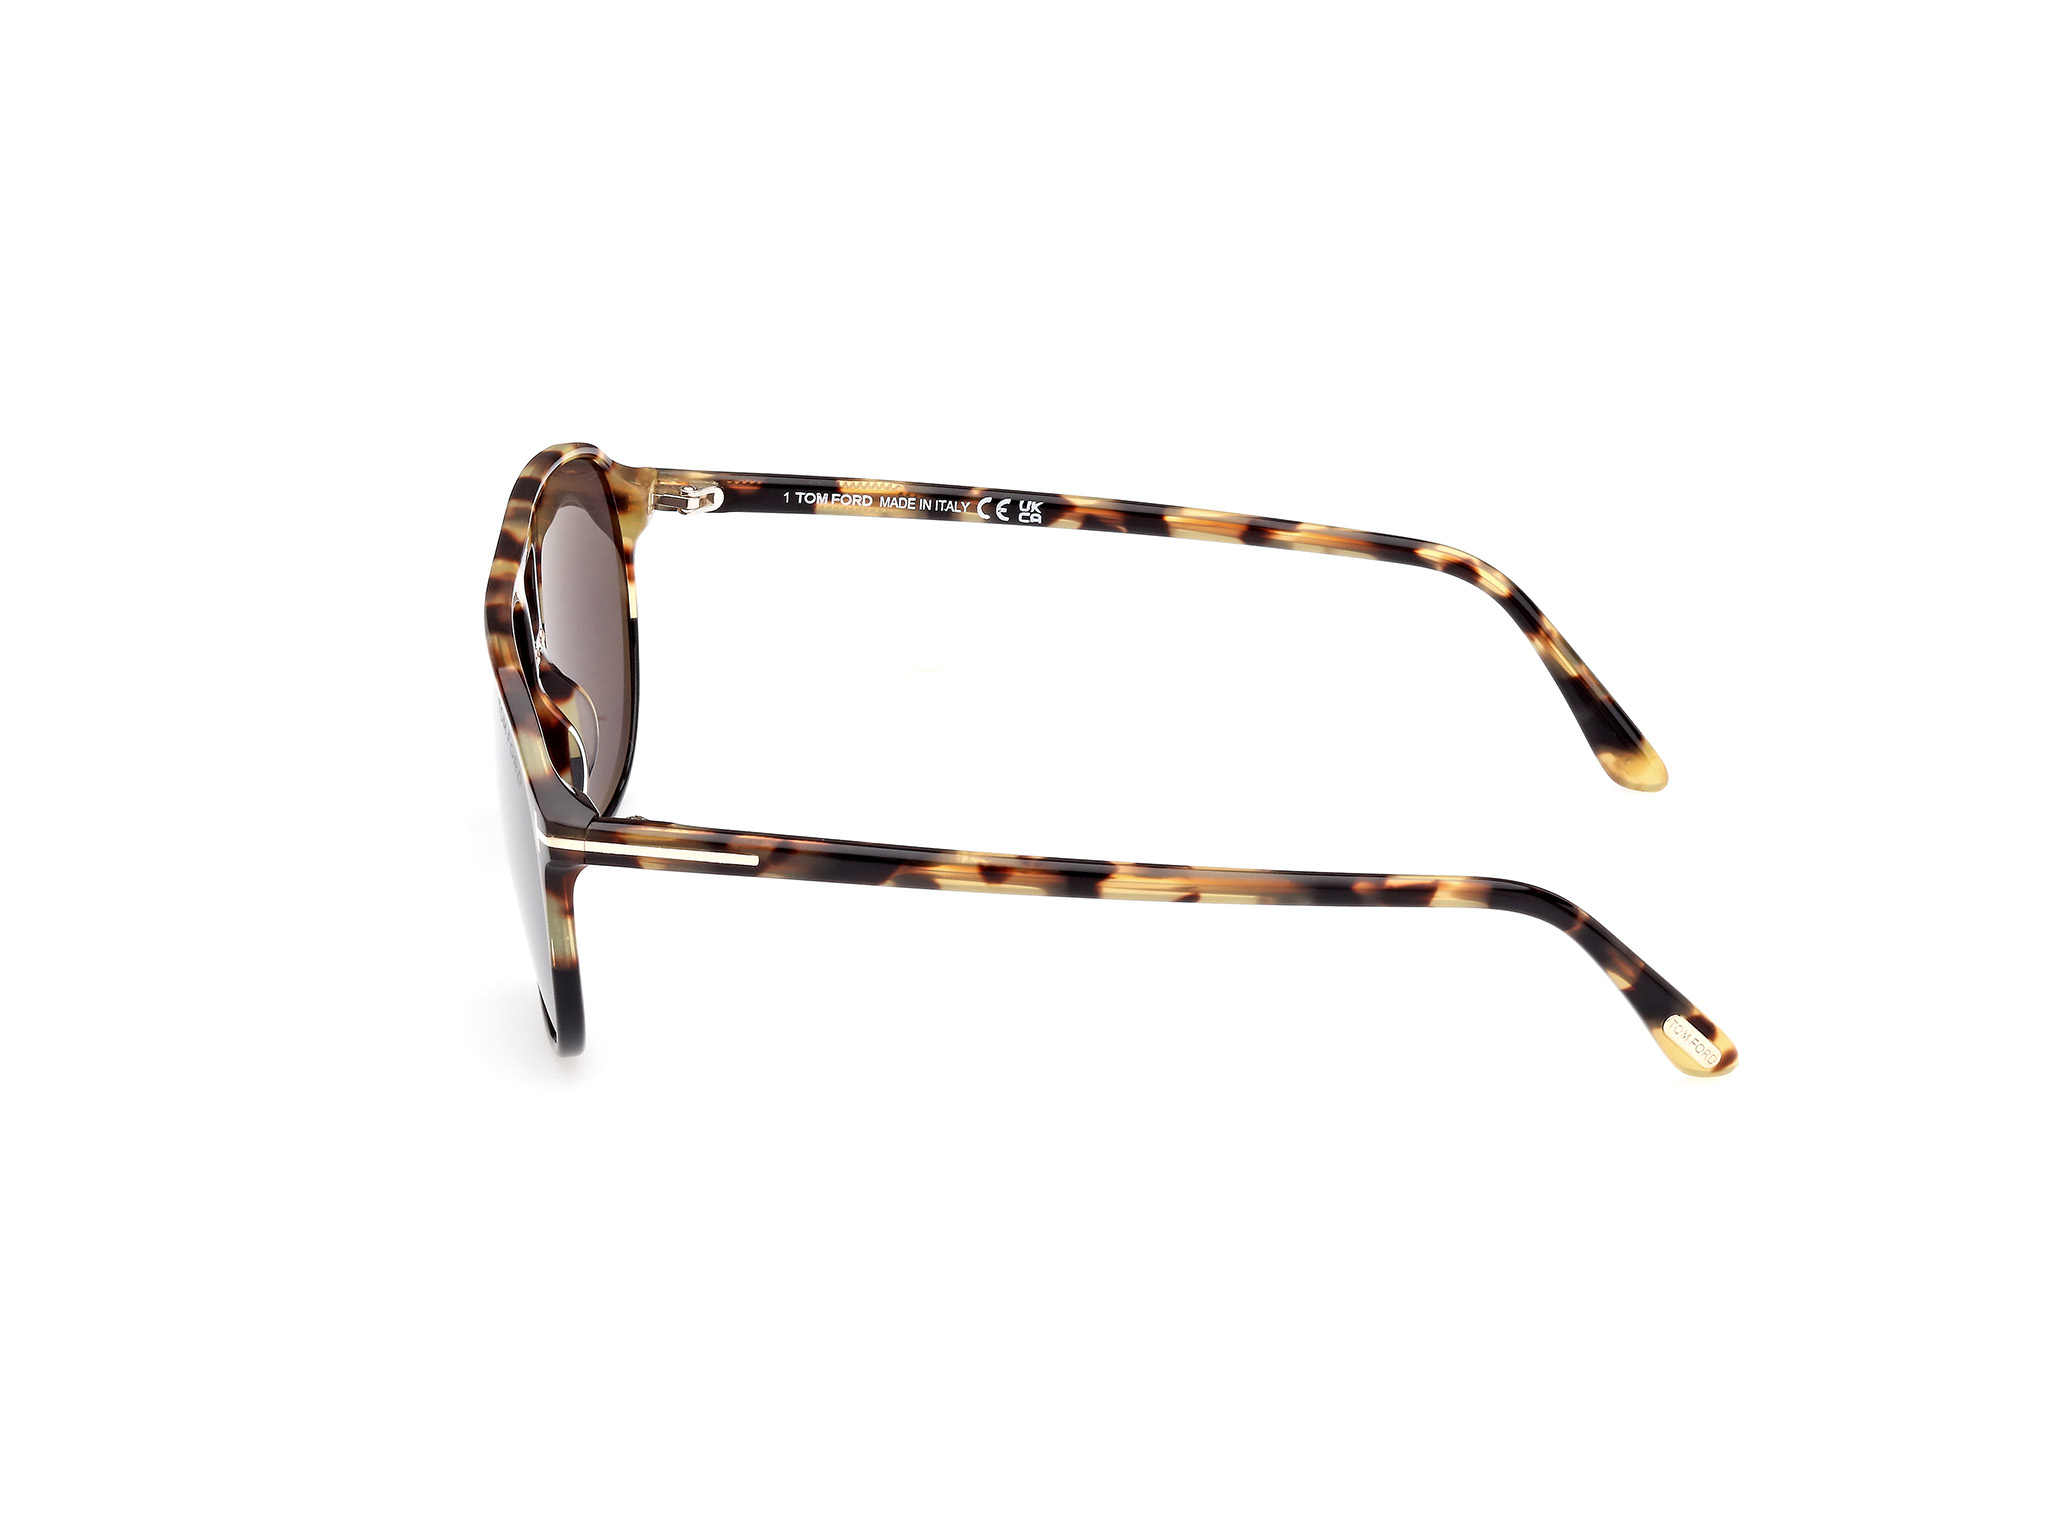 Tom Ford FT1026 05A  